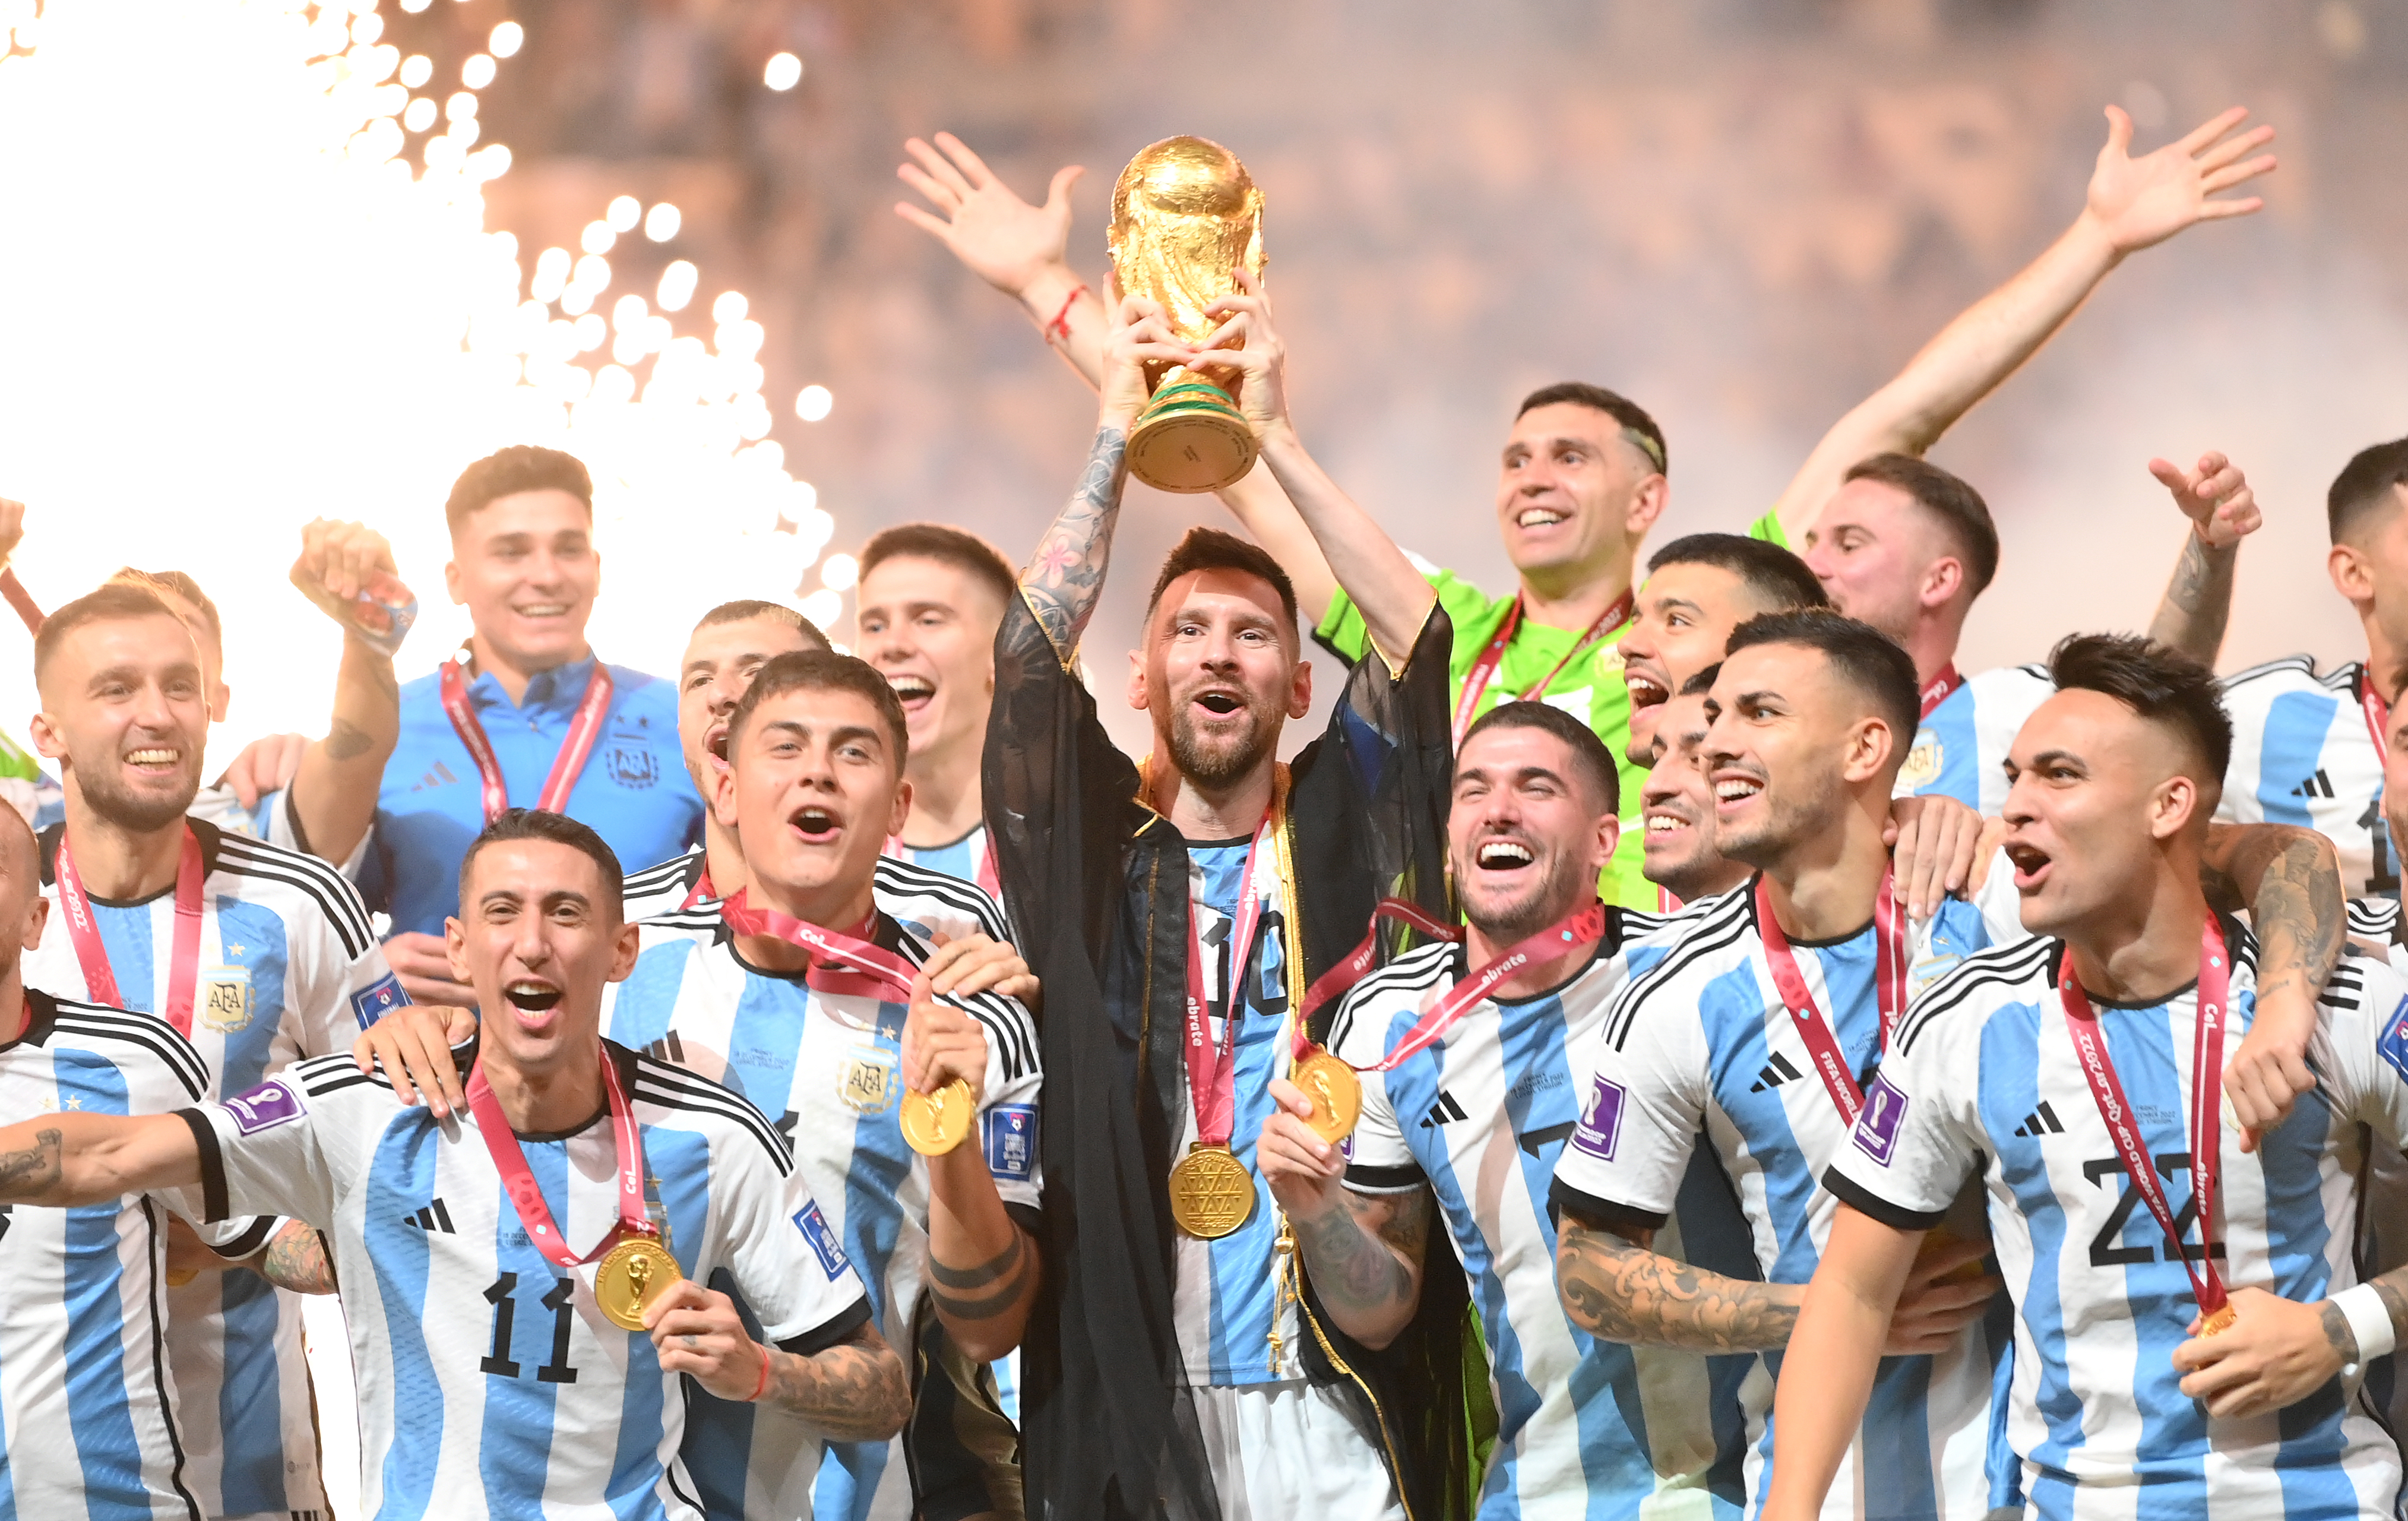 Lionel Messi-inspired Argentina wins World Cup title after beating